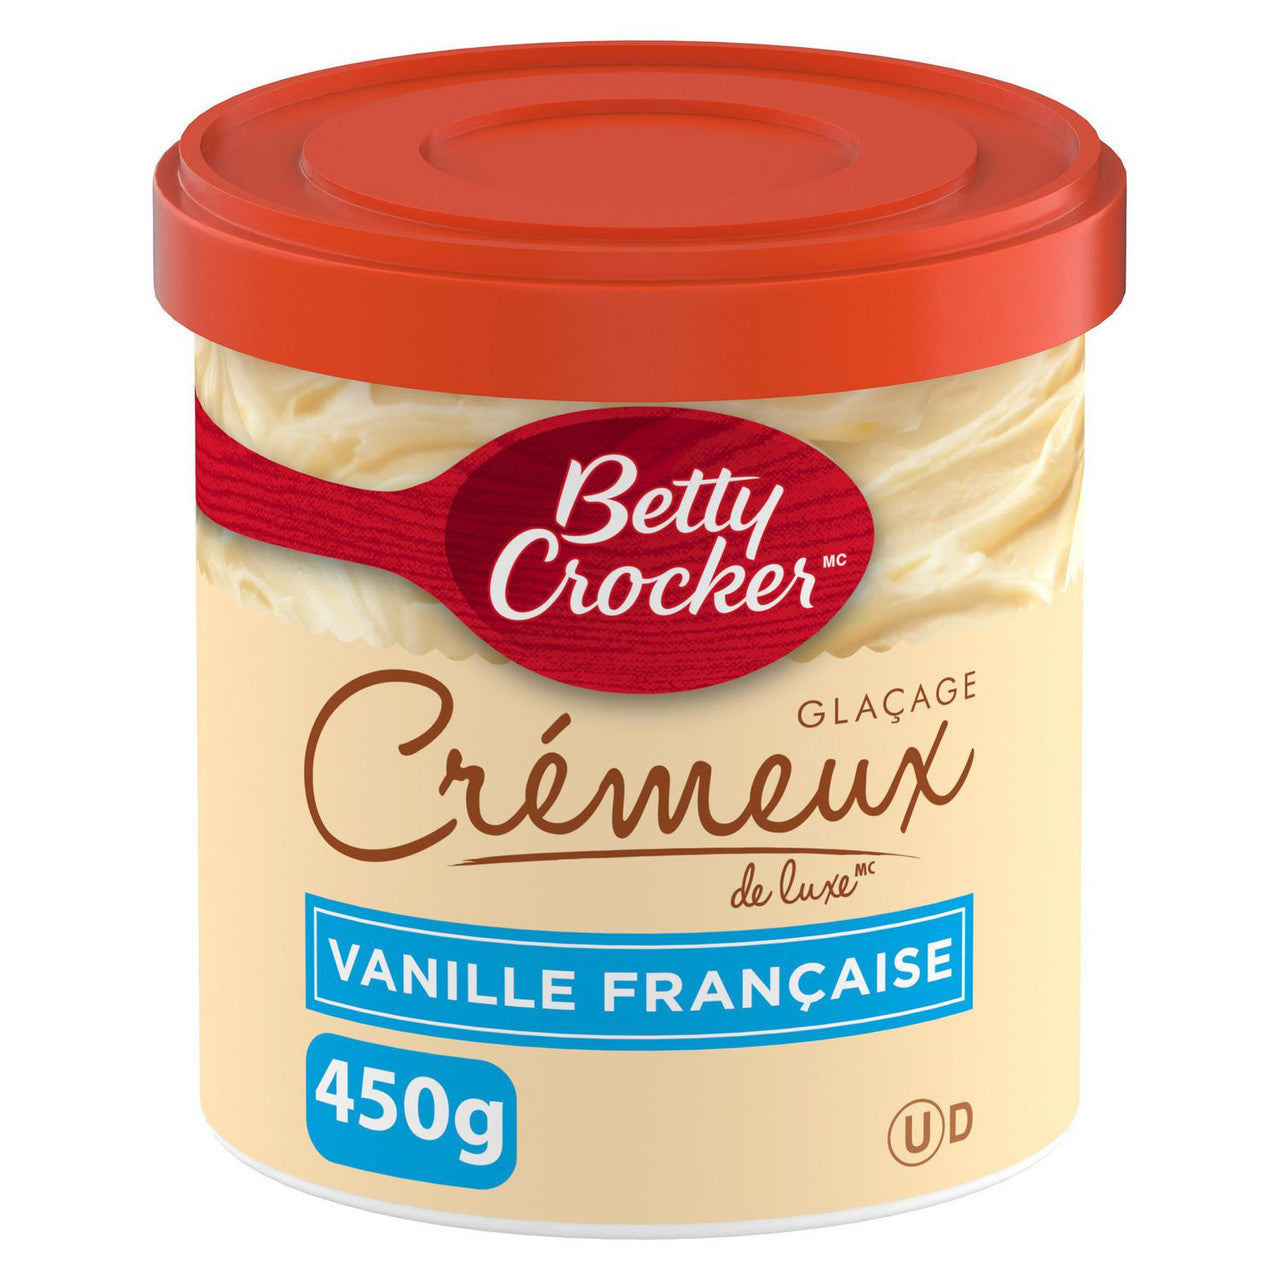 Betty Crocker Gluten Free Creamy Deluxe French Vanilla Frosting, 450g/15.75 oz. Jar {Imported from Canada}